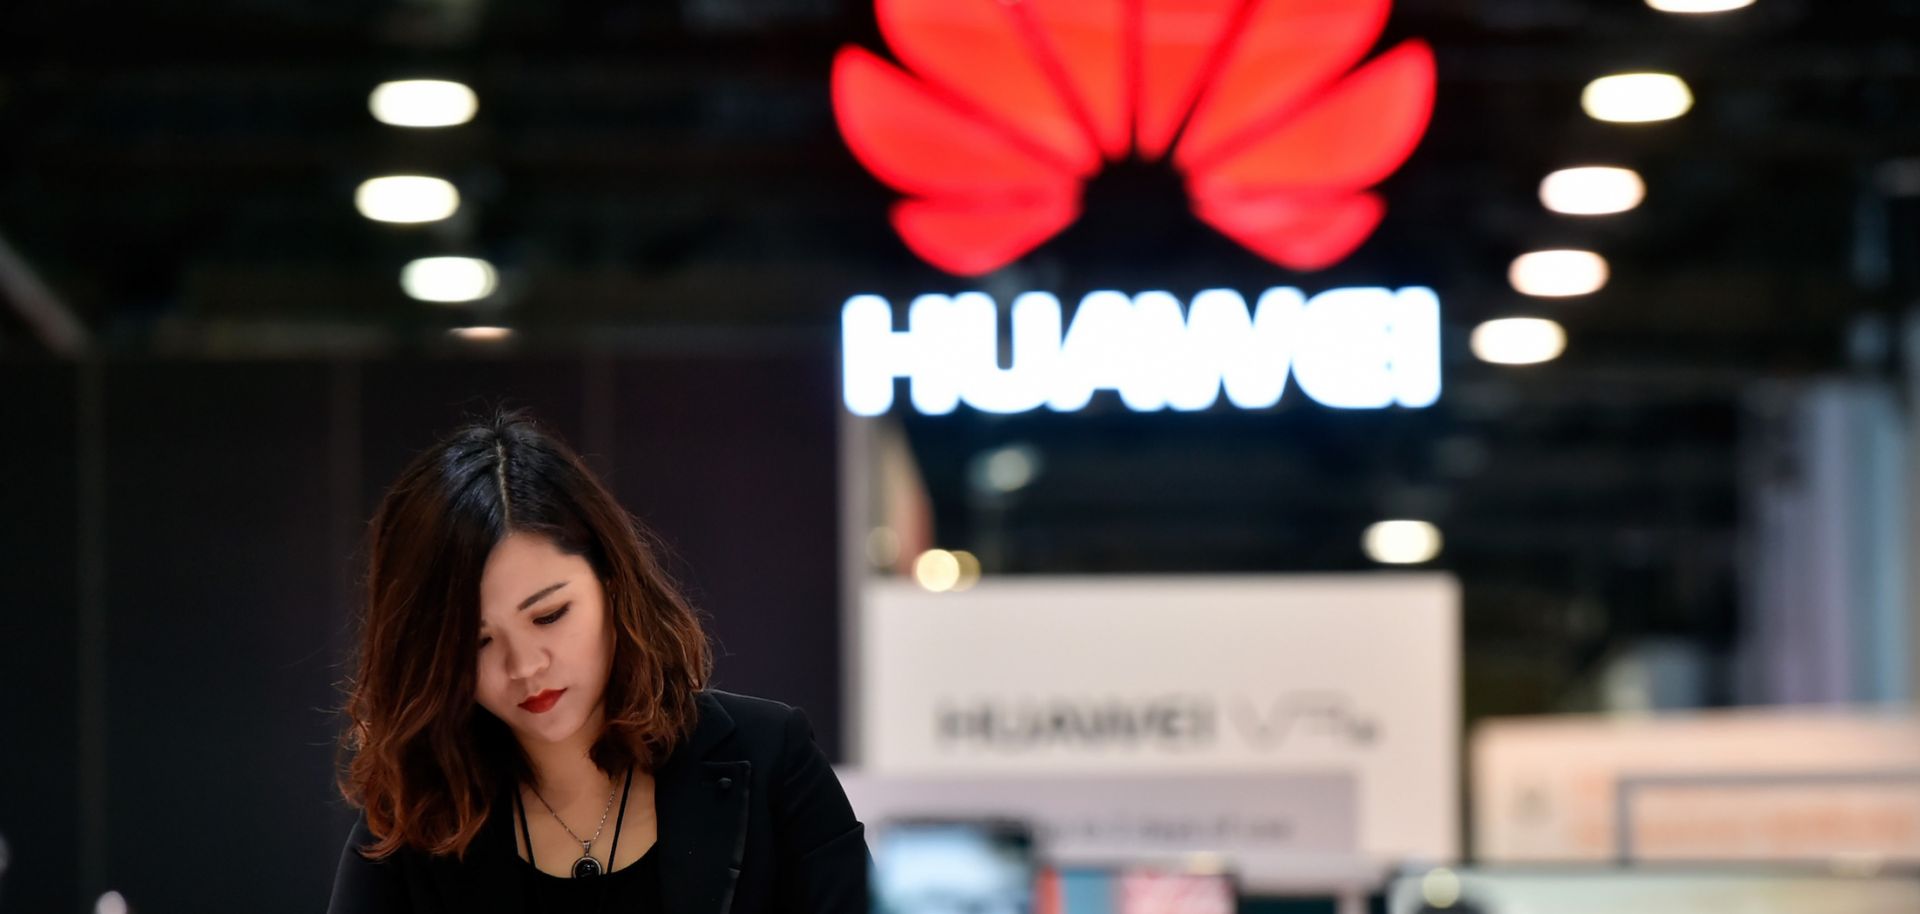 The Huawei booth during CES 2018 in Las Vegas